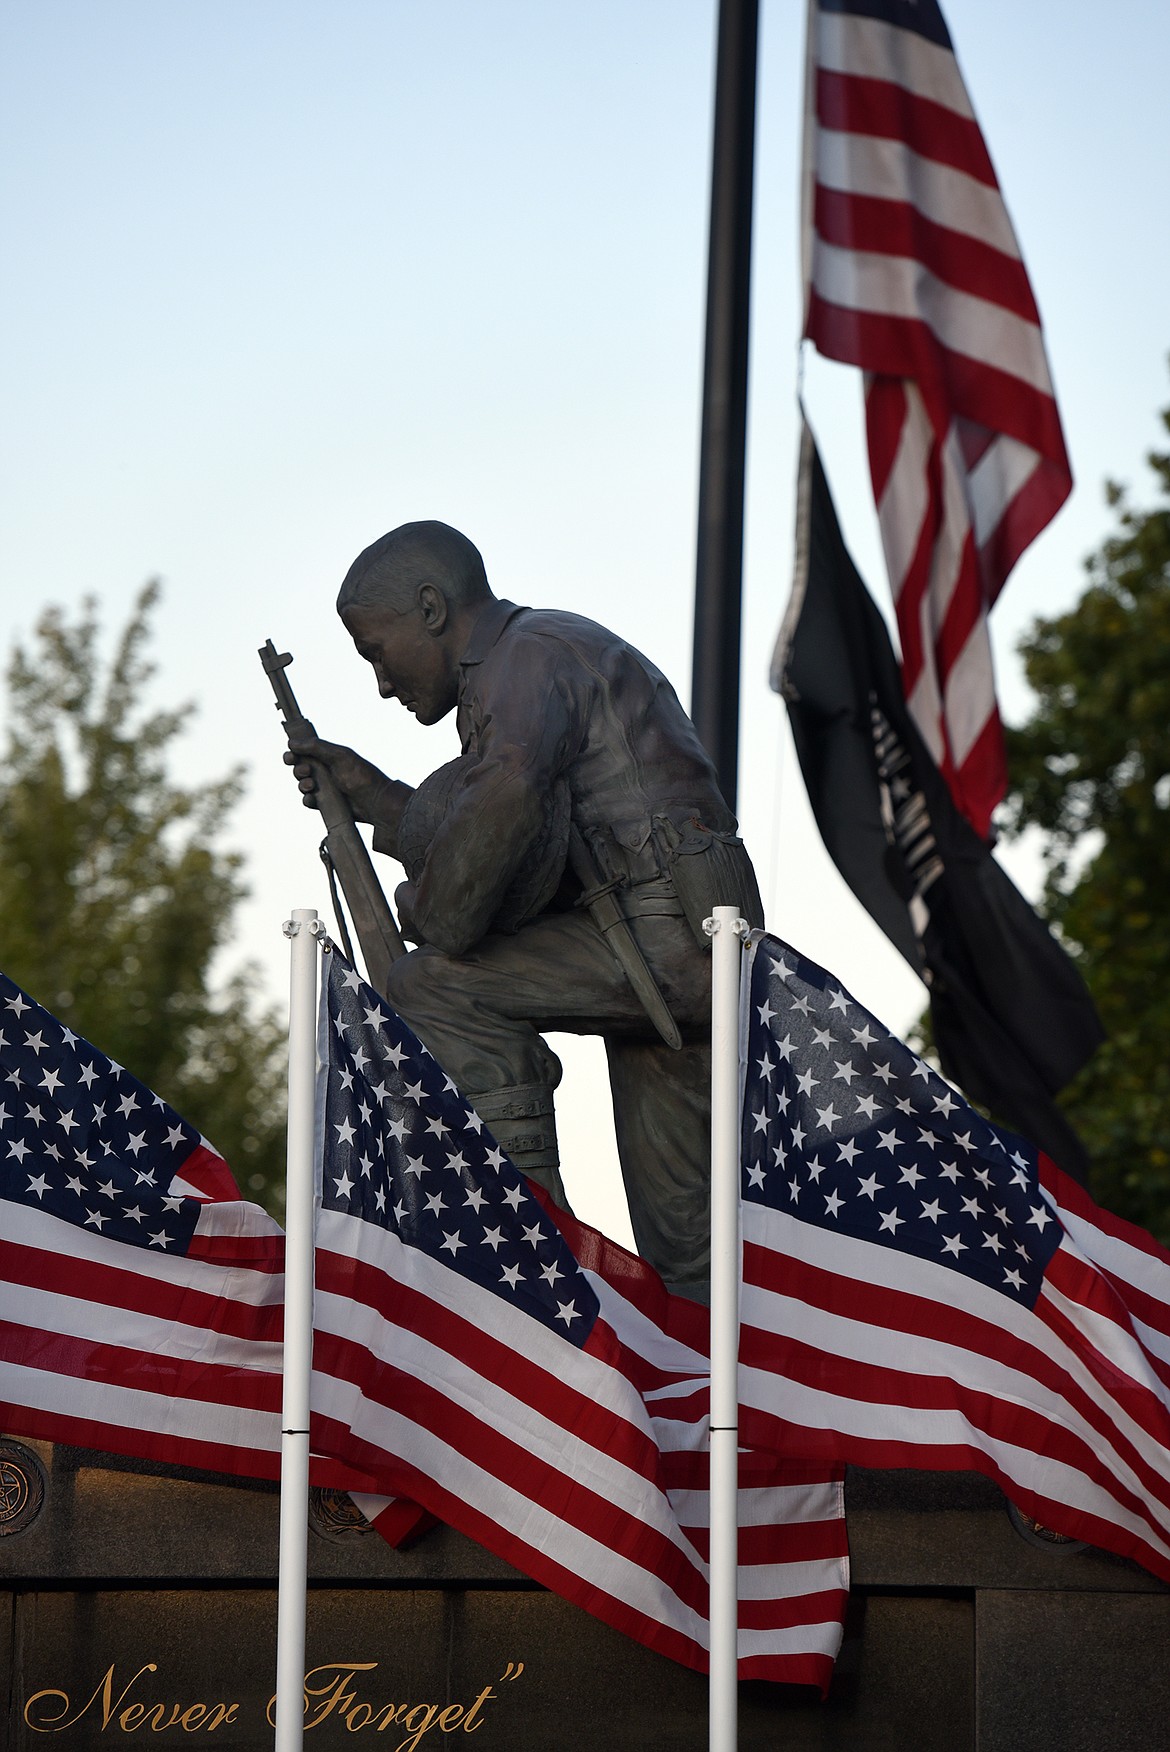 Flags adorn the Flathead County Veterans Memorial in Kalispell's Depot Park on Tuesday, Aug. 31, 2021, shortly before a candlelight vigil was held to honor the 13 U.S. military personnel killed in an Aug. 26 attack outside the Kabul airport in Afghanistan. (Jeremy Weber/Daily Inter Lake)